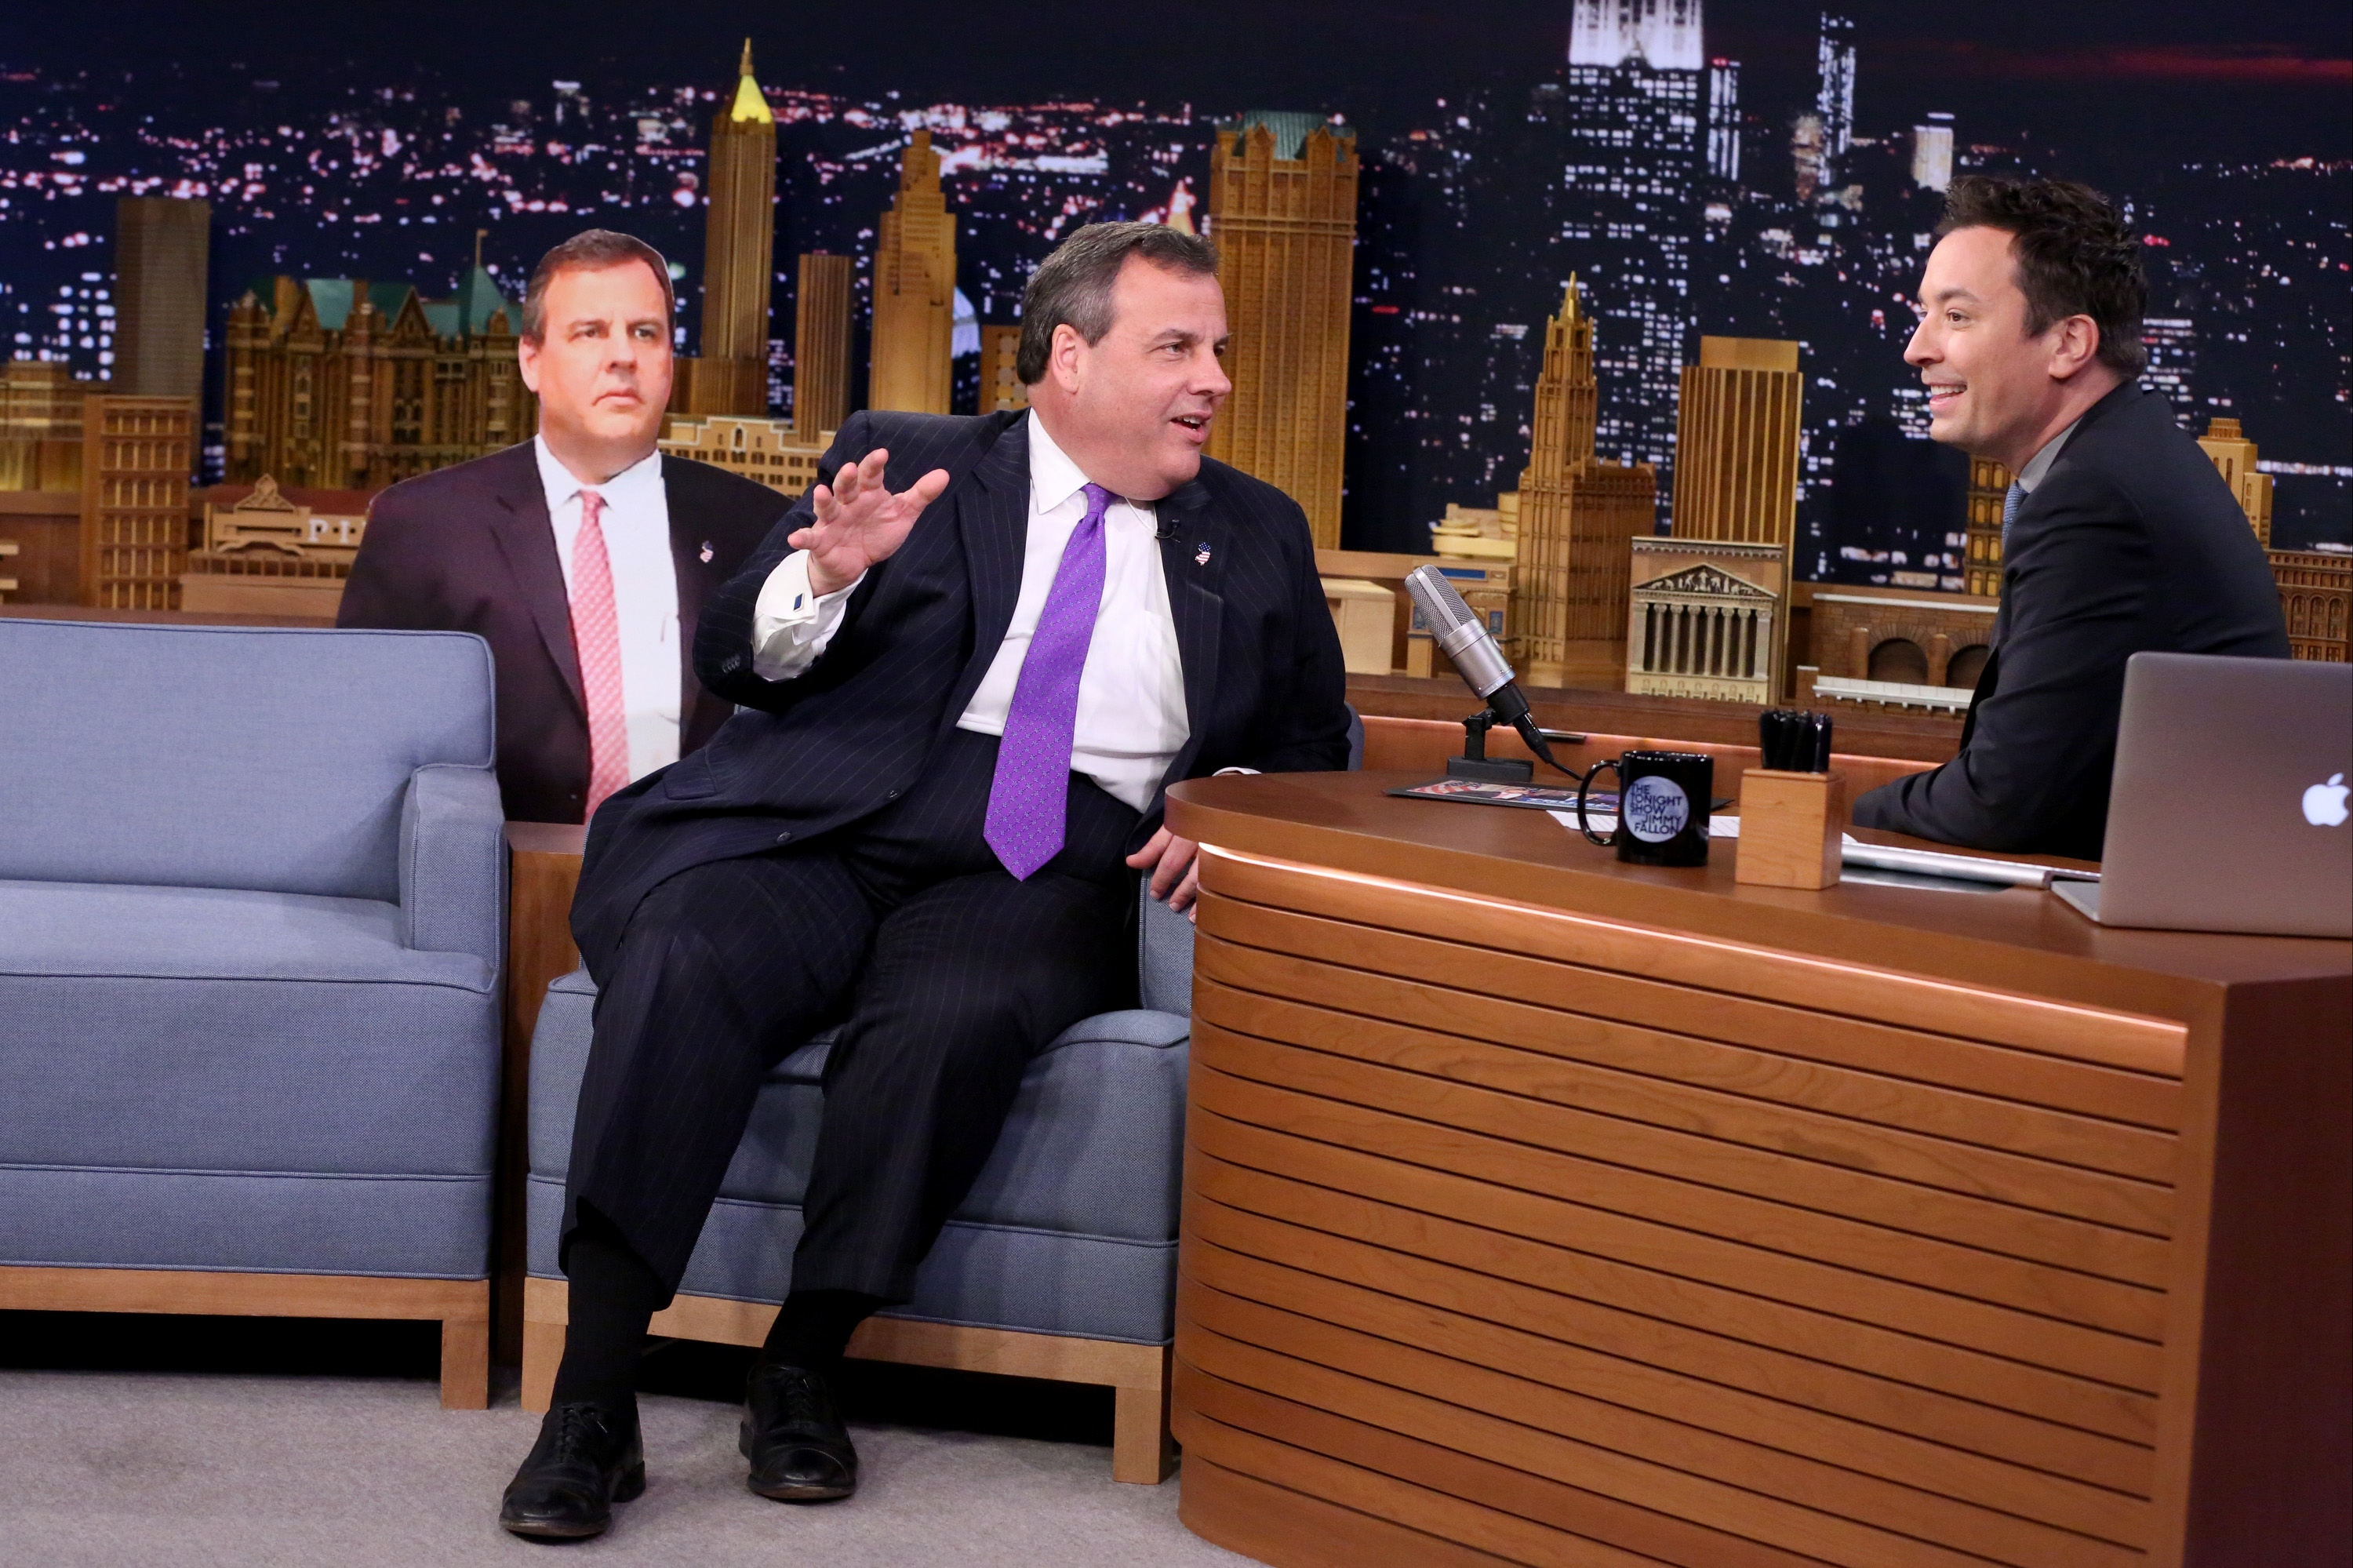 Gov. Chris Christie speaks to Jimmy Fallon during an interview on April 1. (Andrew Lipovsky—NBC/Getty Images)